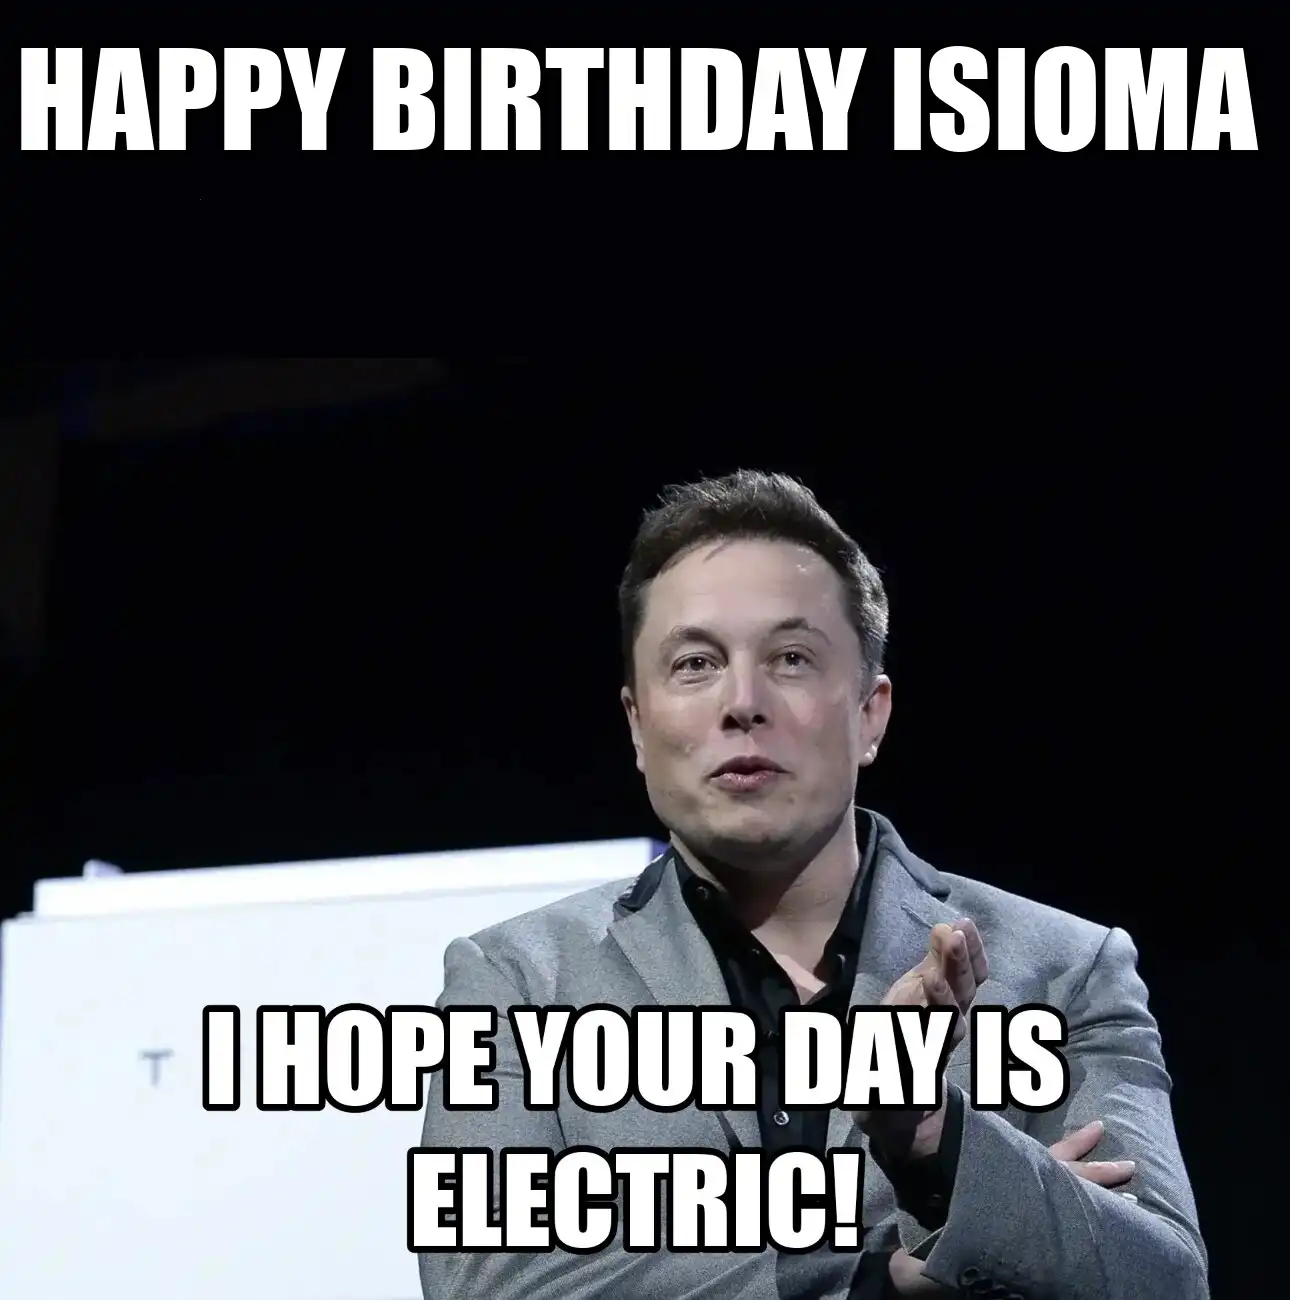 Happy Birthday Isioma I Hope Your Day Is Electric Meme